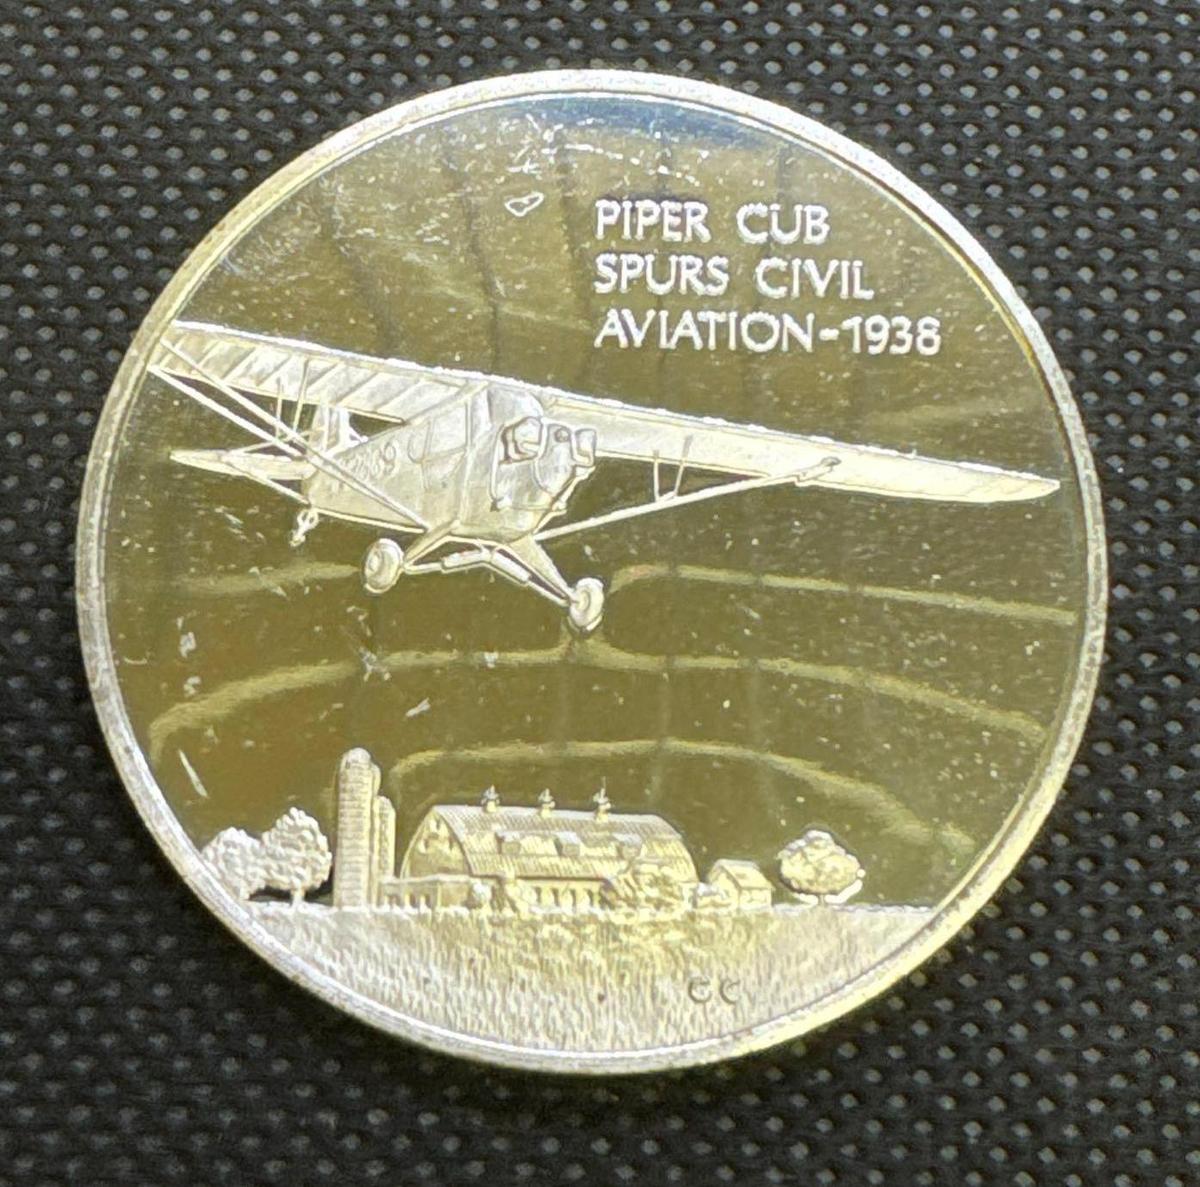 History Of Flight Piper CUB Spurs Civil Aviation 1936 Sterling Silver Coin 1.30 Oz